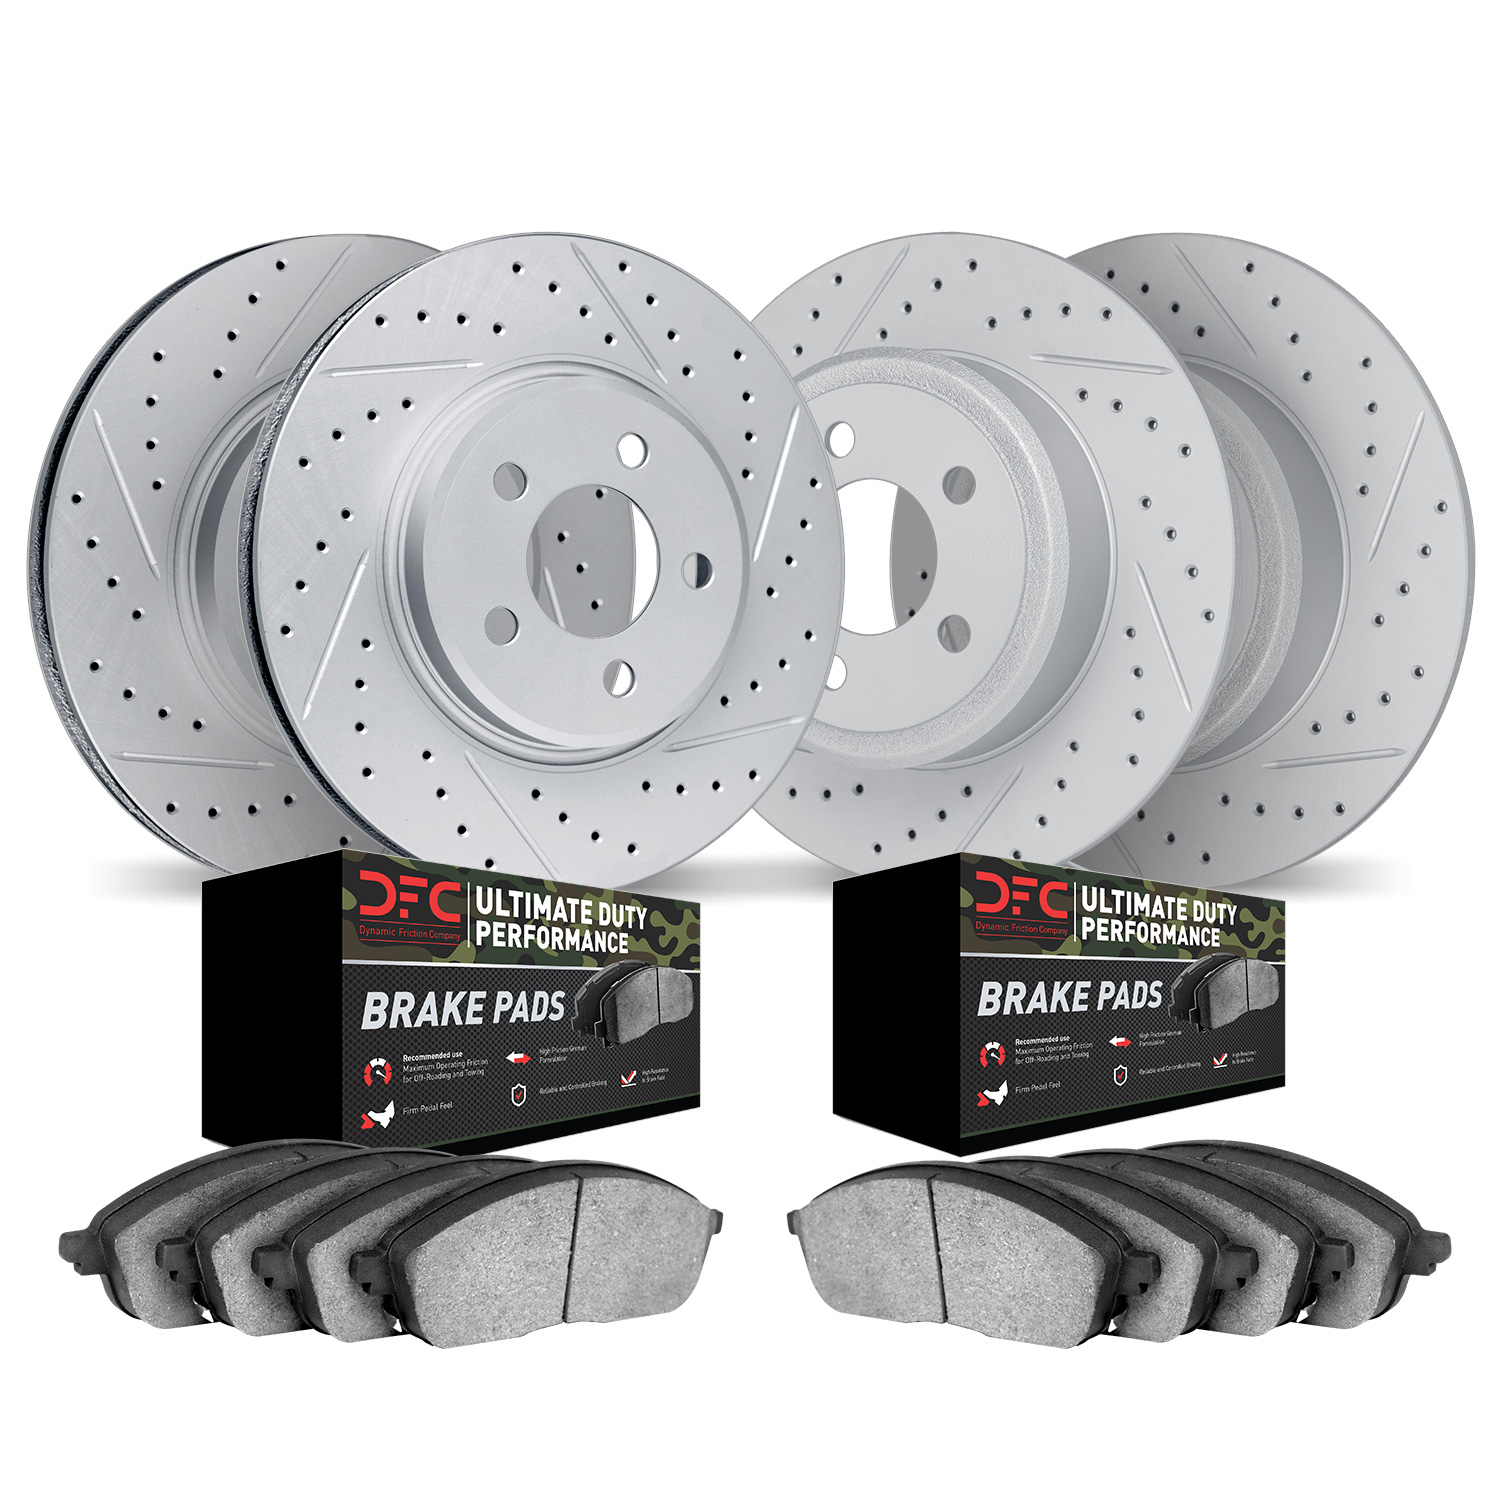 2404-42009 Geoperformance Drilled/Slotted Brake Rotors with Ultimate-Duty Brake Pads Kit, 2007-2012 Mopar, Position: Front and R